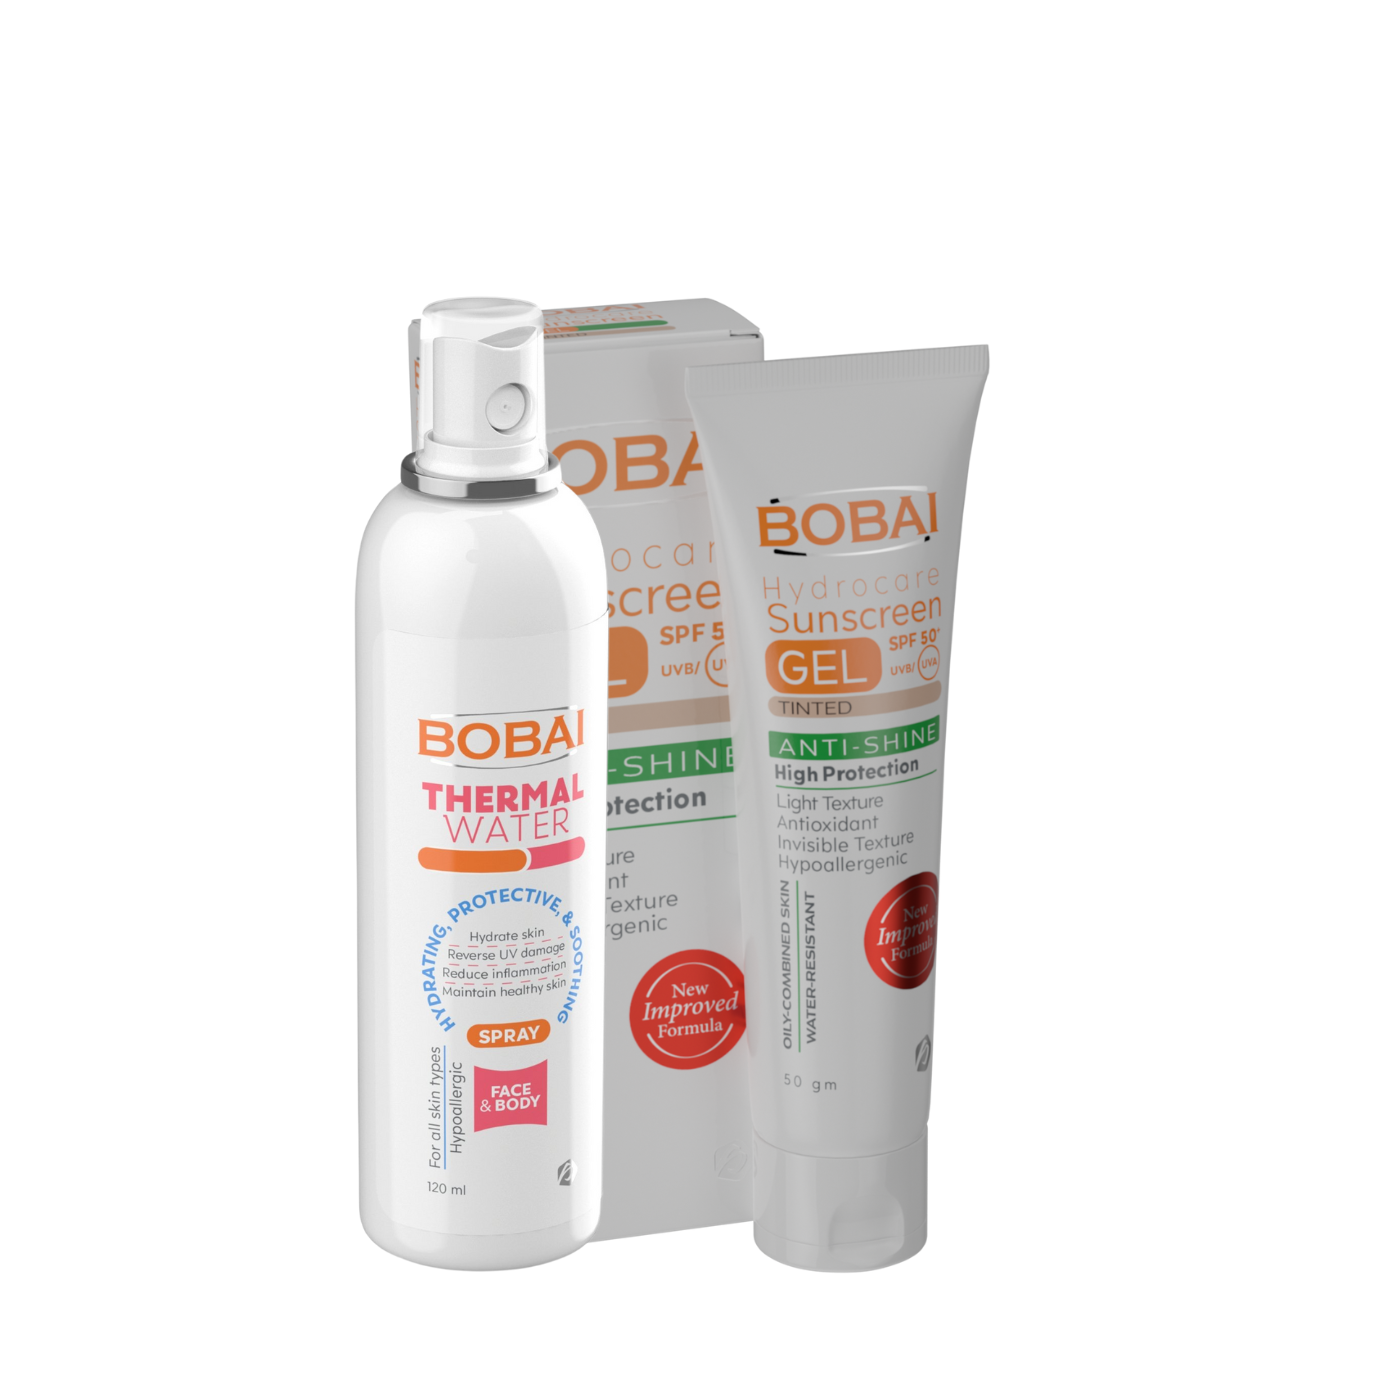 BOBAI Sunscreen Hydrocare Tinted Gel SPF 50+ and BOBAI Thermal Water Offer Pack)